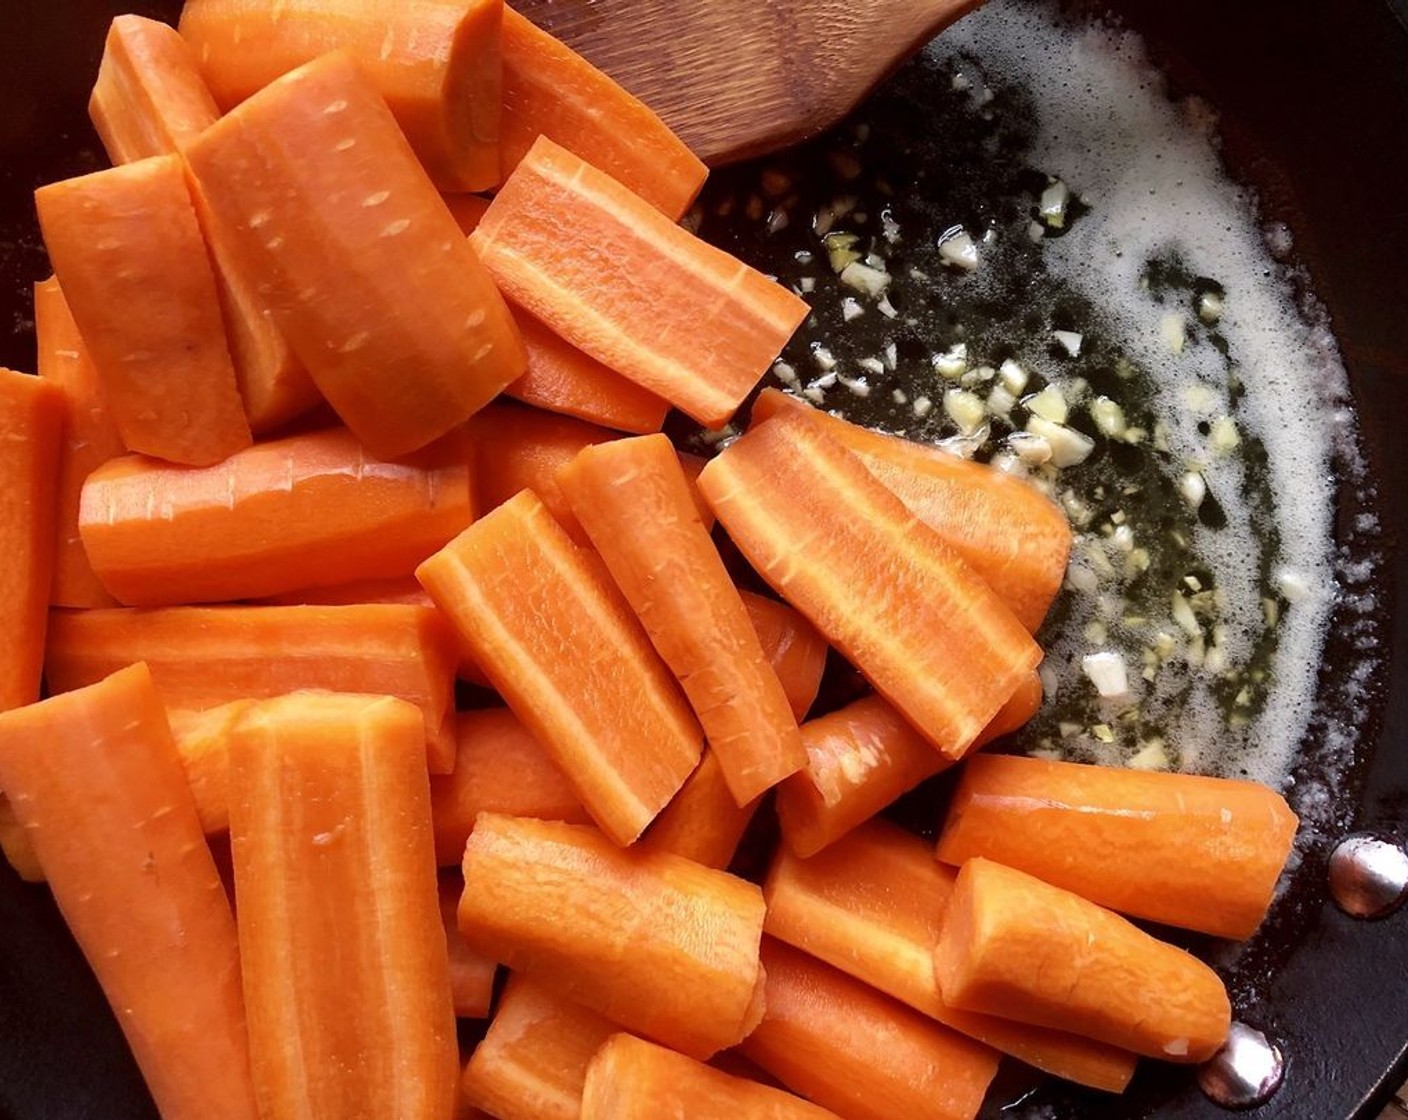 step 5 Add the carrot pieces and allow the sauce to thicken for a further minute while tossing the carrots through the sauce so that they are evenly coated. Season with the Salt (1/2 tsp) and Freshly Ground Black Pepper (to taste).